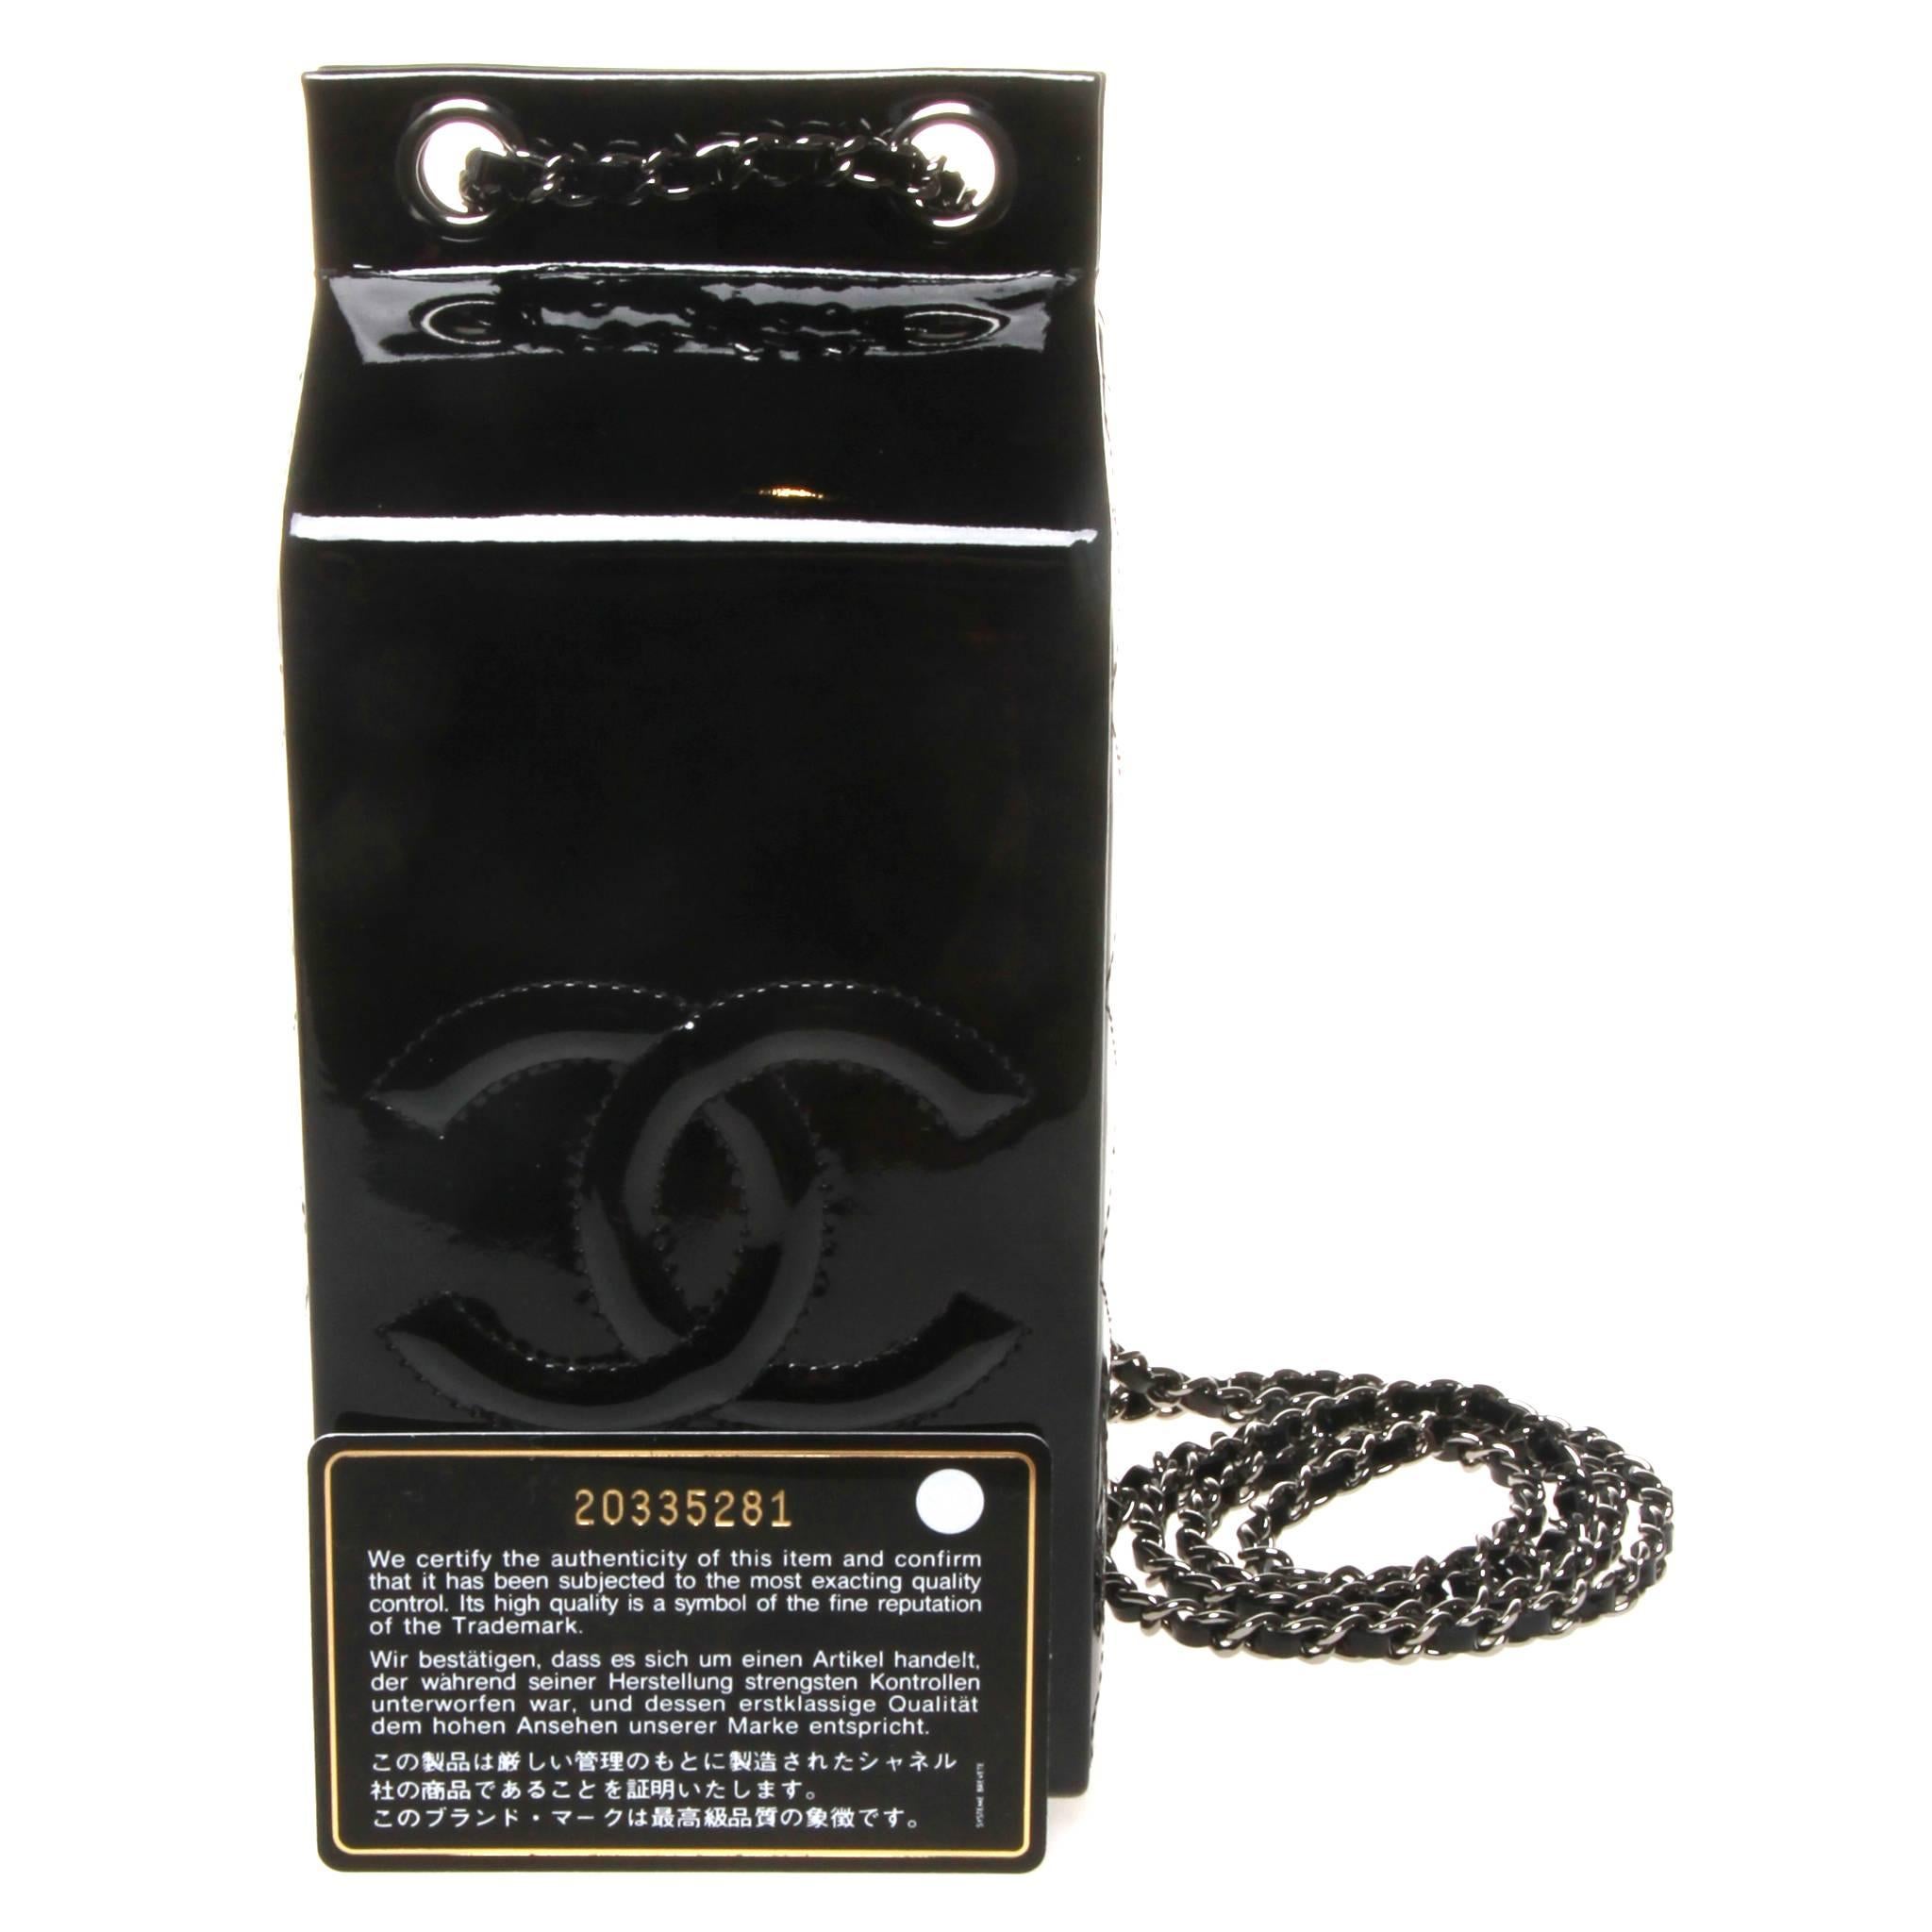 Rare limited edition Chanel milk carton bag from the luxury supermarket inspired Fall 14 ready-to-wear collection. Crafted allover of black patent leather and offset by the iconic threaded chain strap with patent leather and silver-tone hardware. 